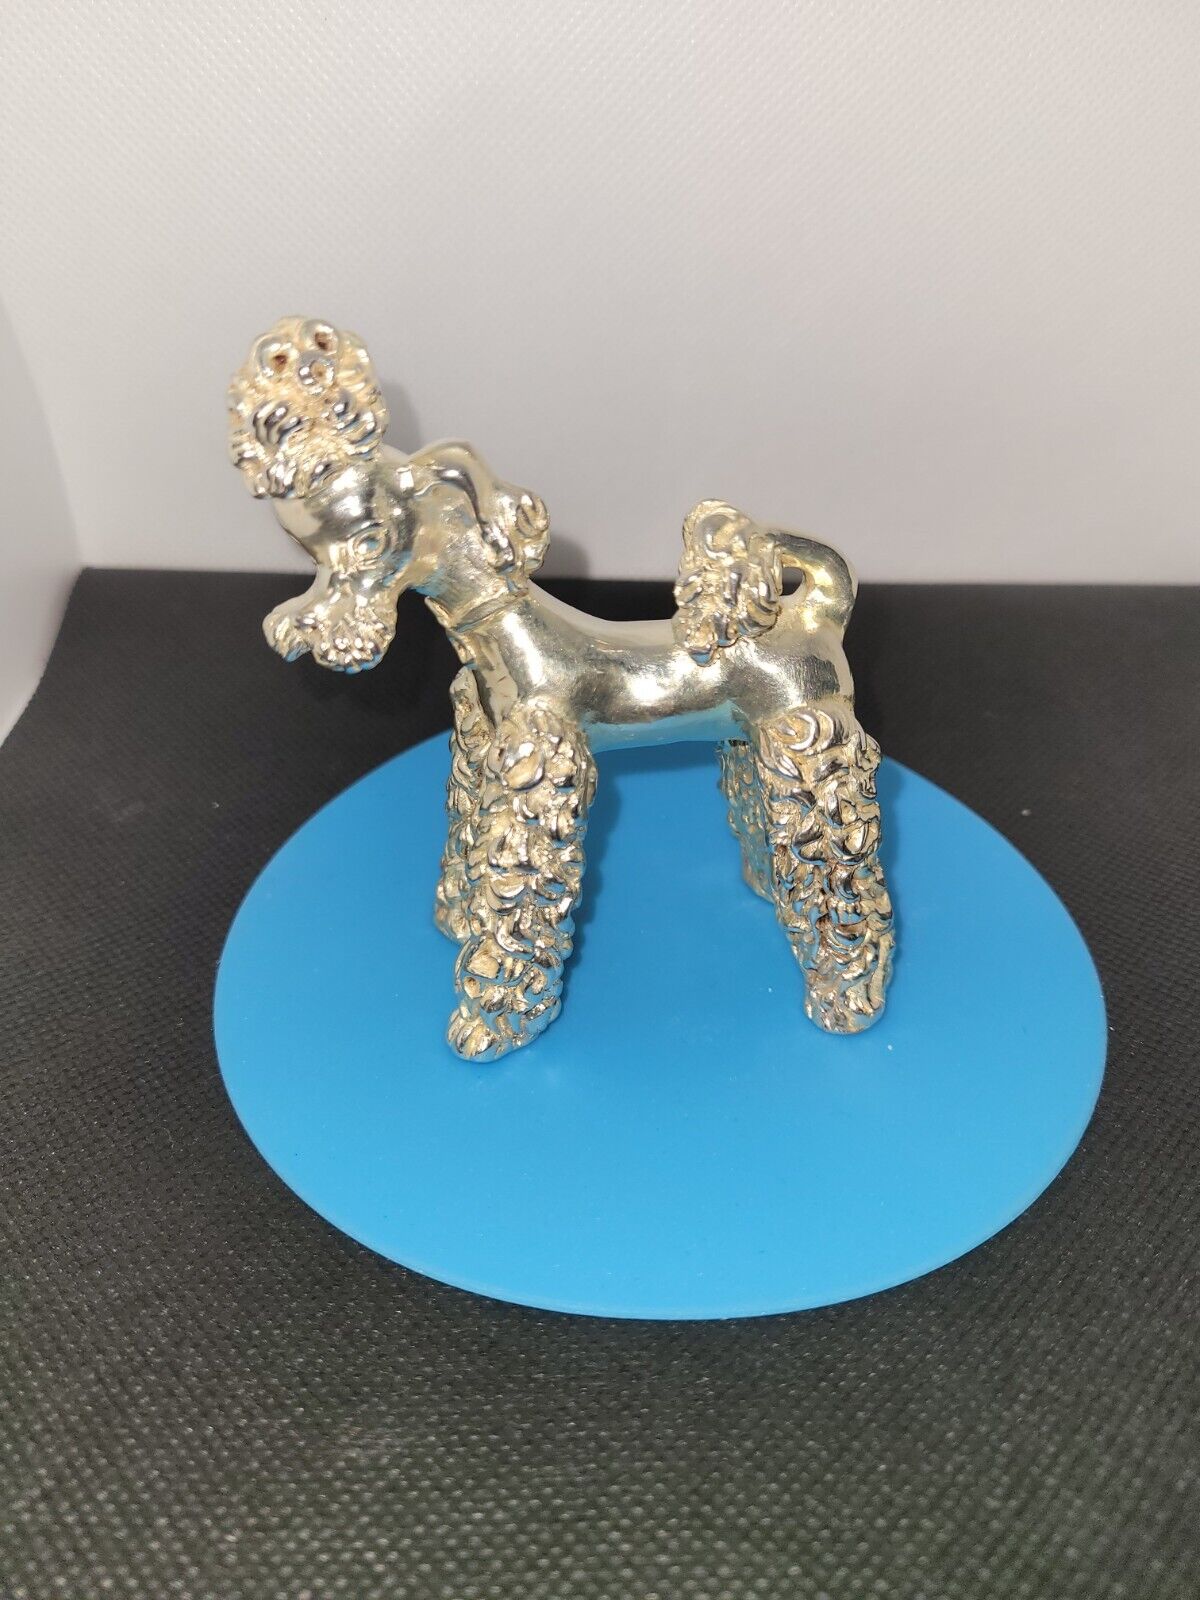 Sterling Silver French Poodle Dog Figurine  3.25 Inches Tall 60 Grams